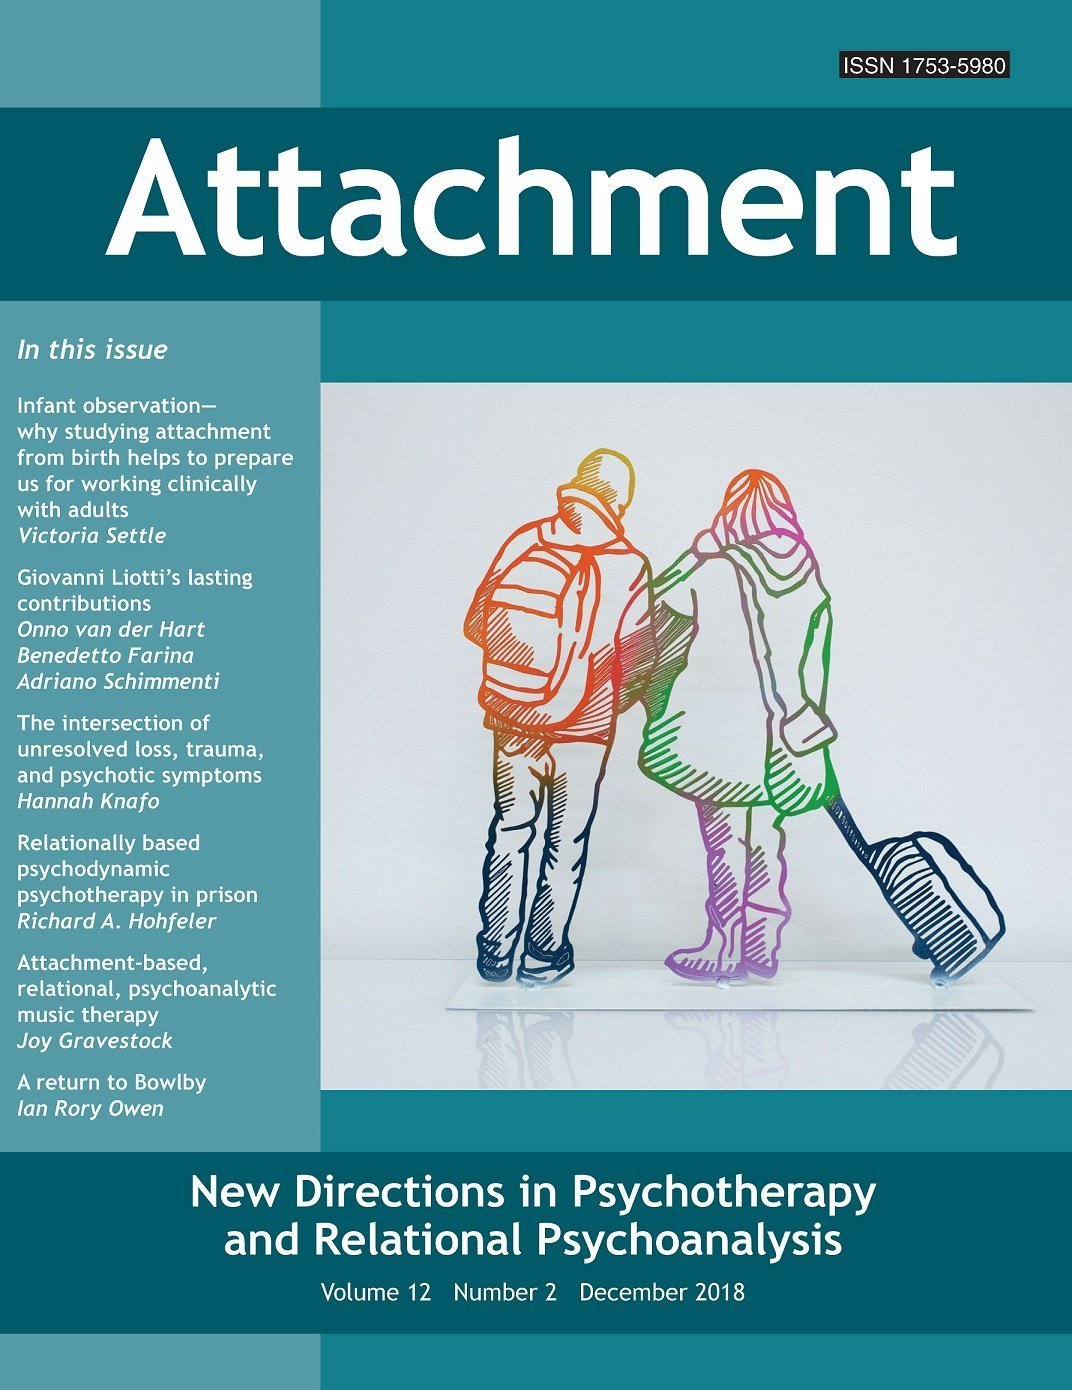 Attachment: New Directions in Psychotherapy and Relational Psychoanalysis - Vol.12 No.2